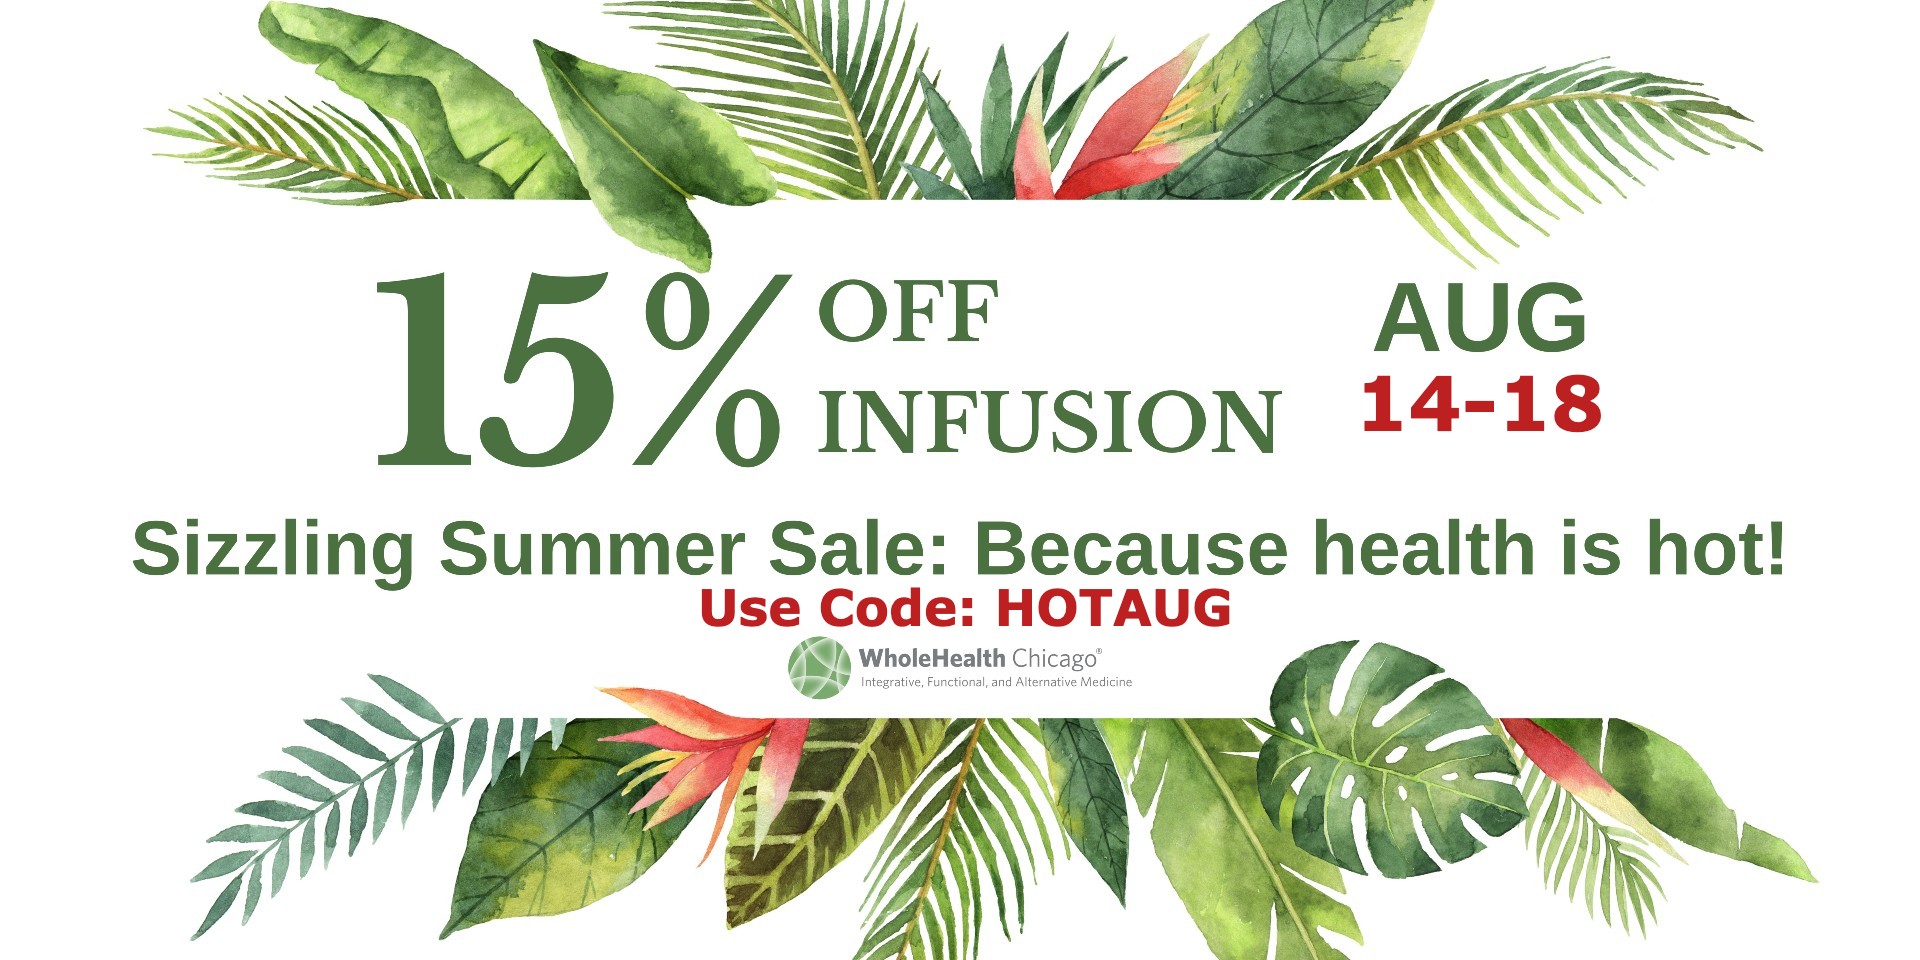 INFUSION SALE!